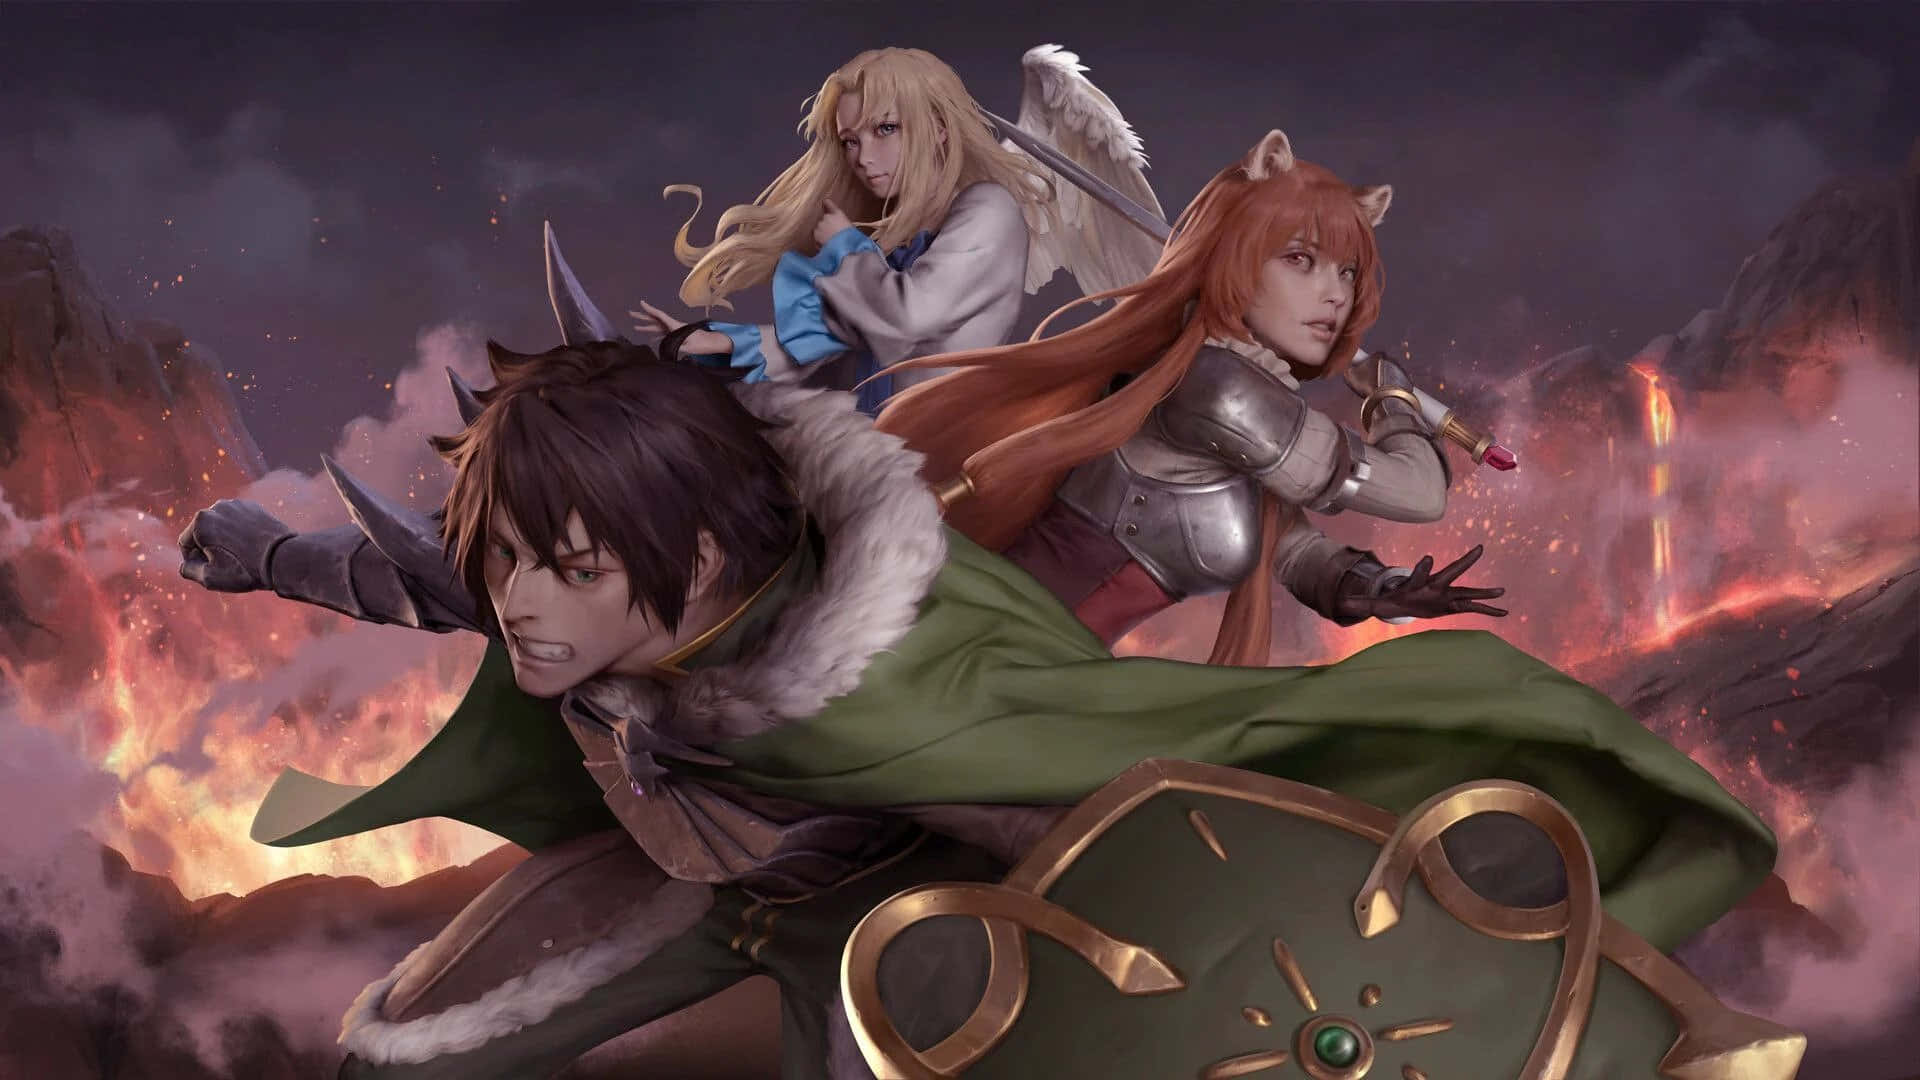 The Shields of the Rising of the Shield Hero